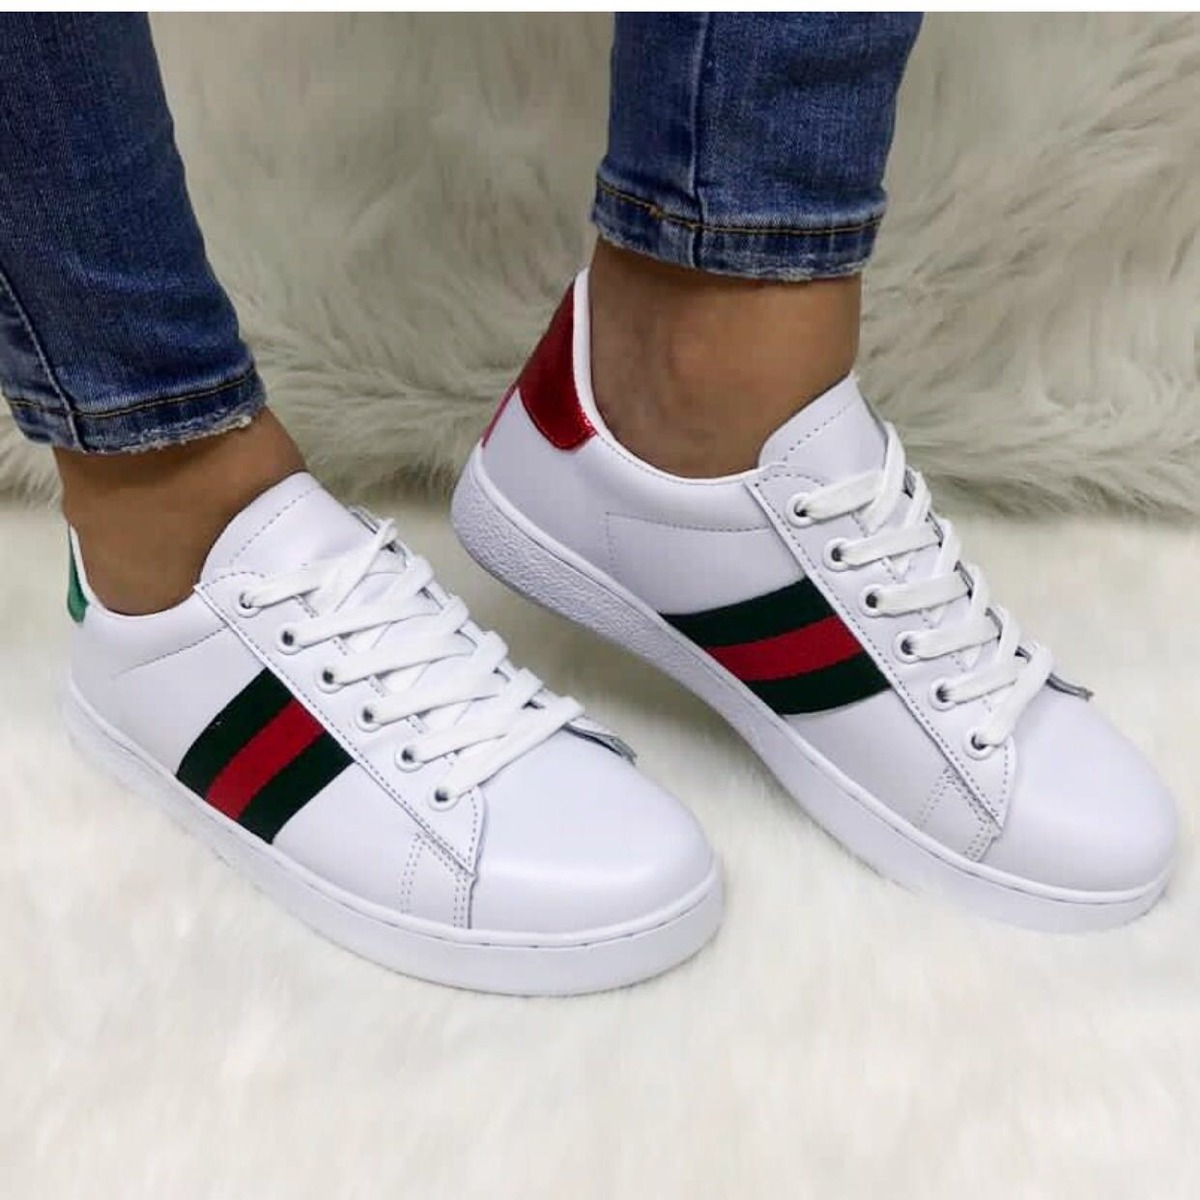 Tenis Gucci Online, SAVE 55%.